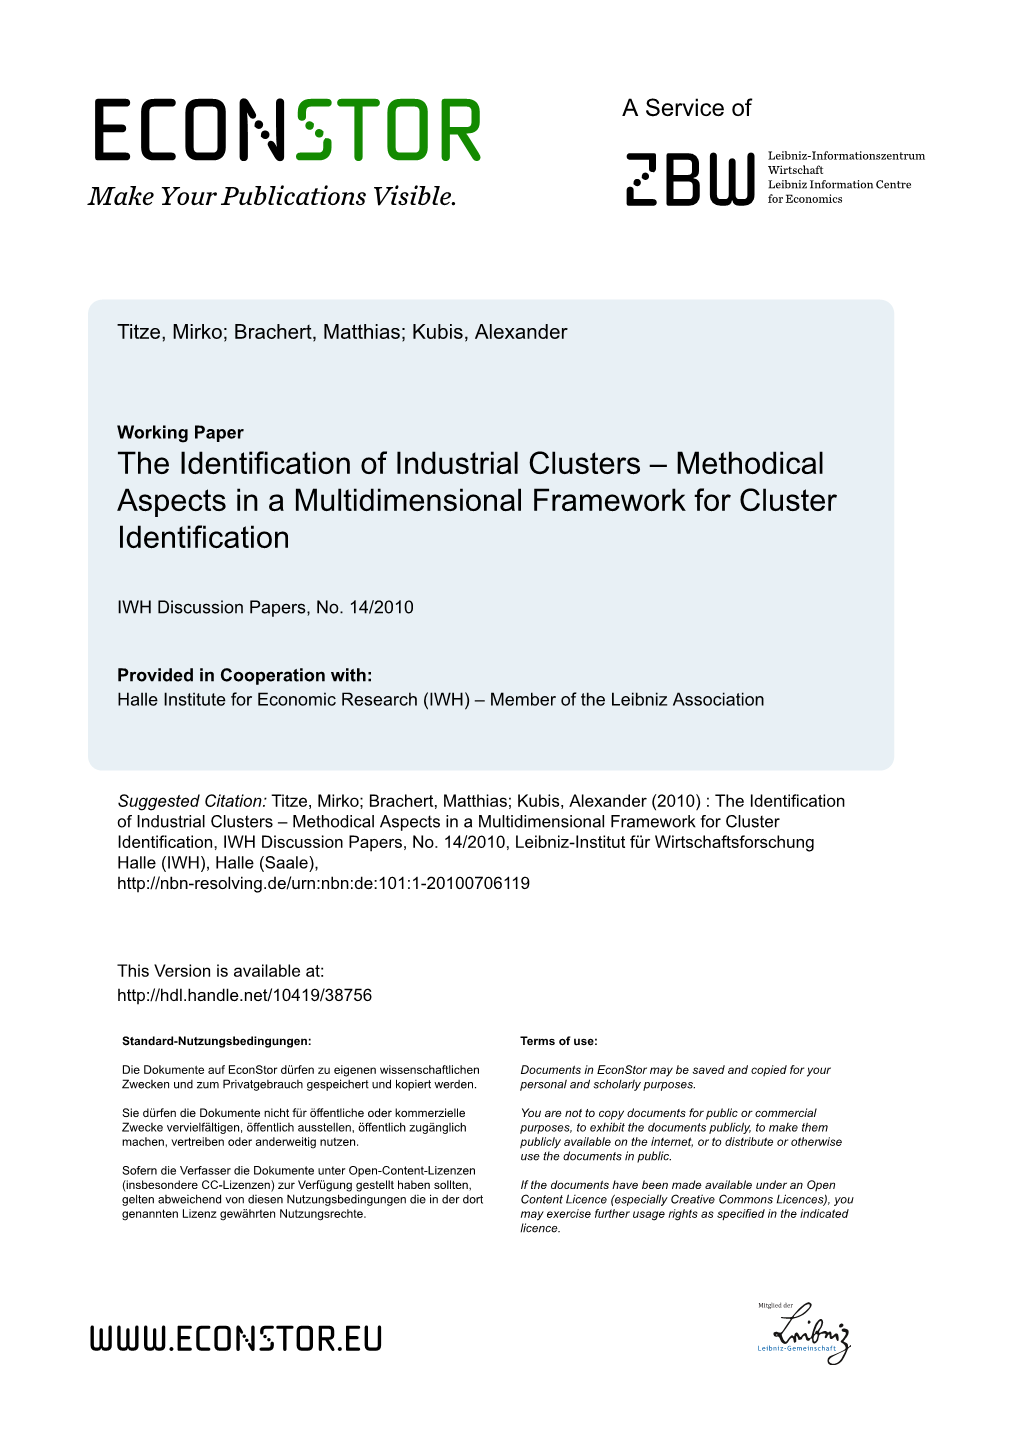 The Identification of Industrial Clusters – Methodical Aspects in a Multidimensional Framework for Cluster Identification